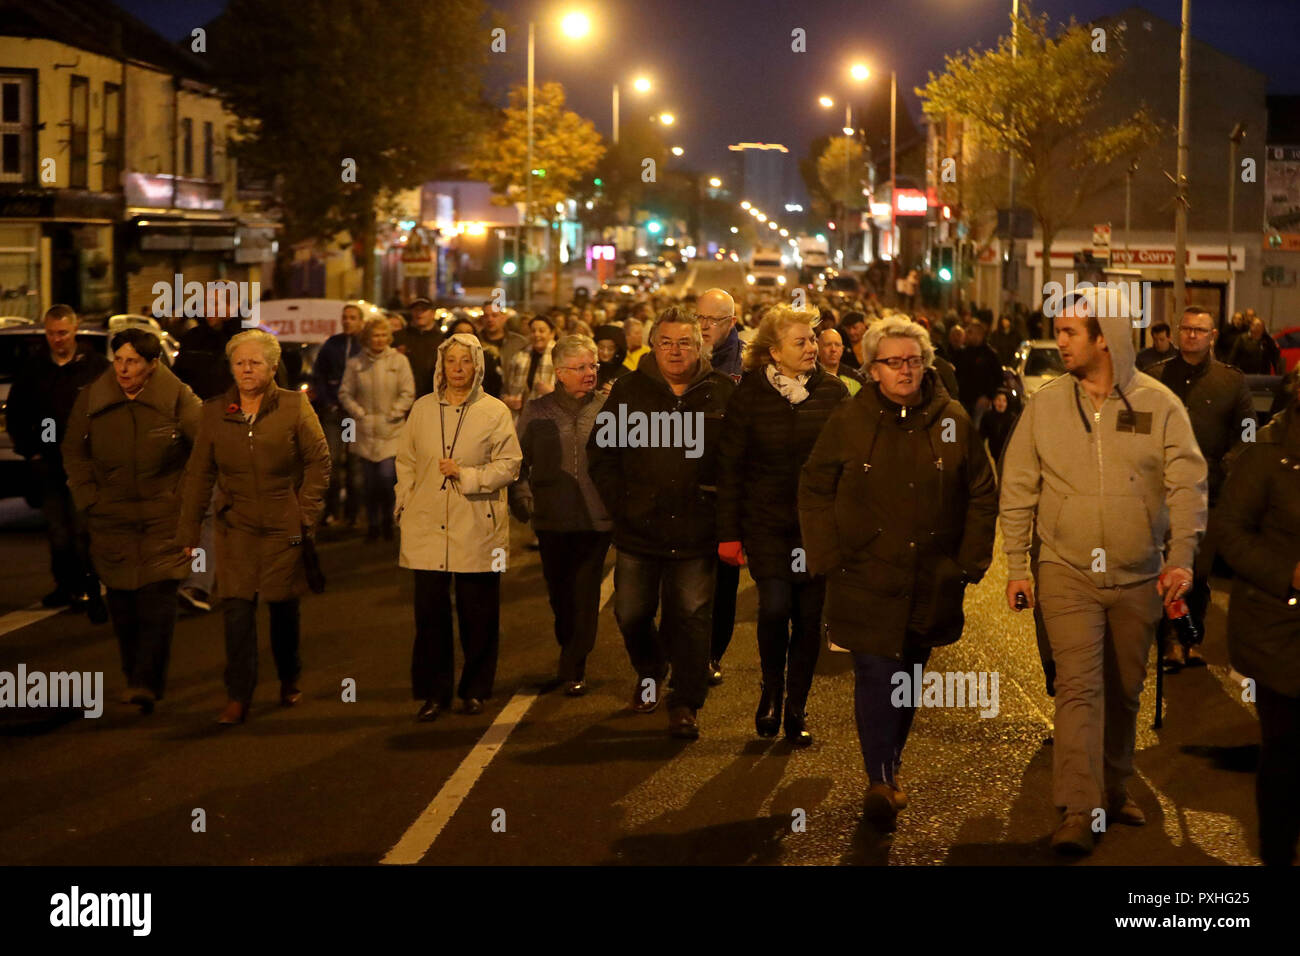 Members of the public take part in a memorial march in Belfast, to mark the 25th anniversary of the Shankill Road bombing in which nine innocent people were killed by an IRA bomb. Stock Photo